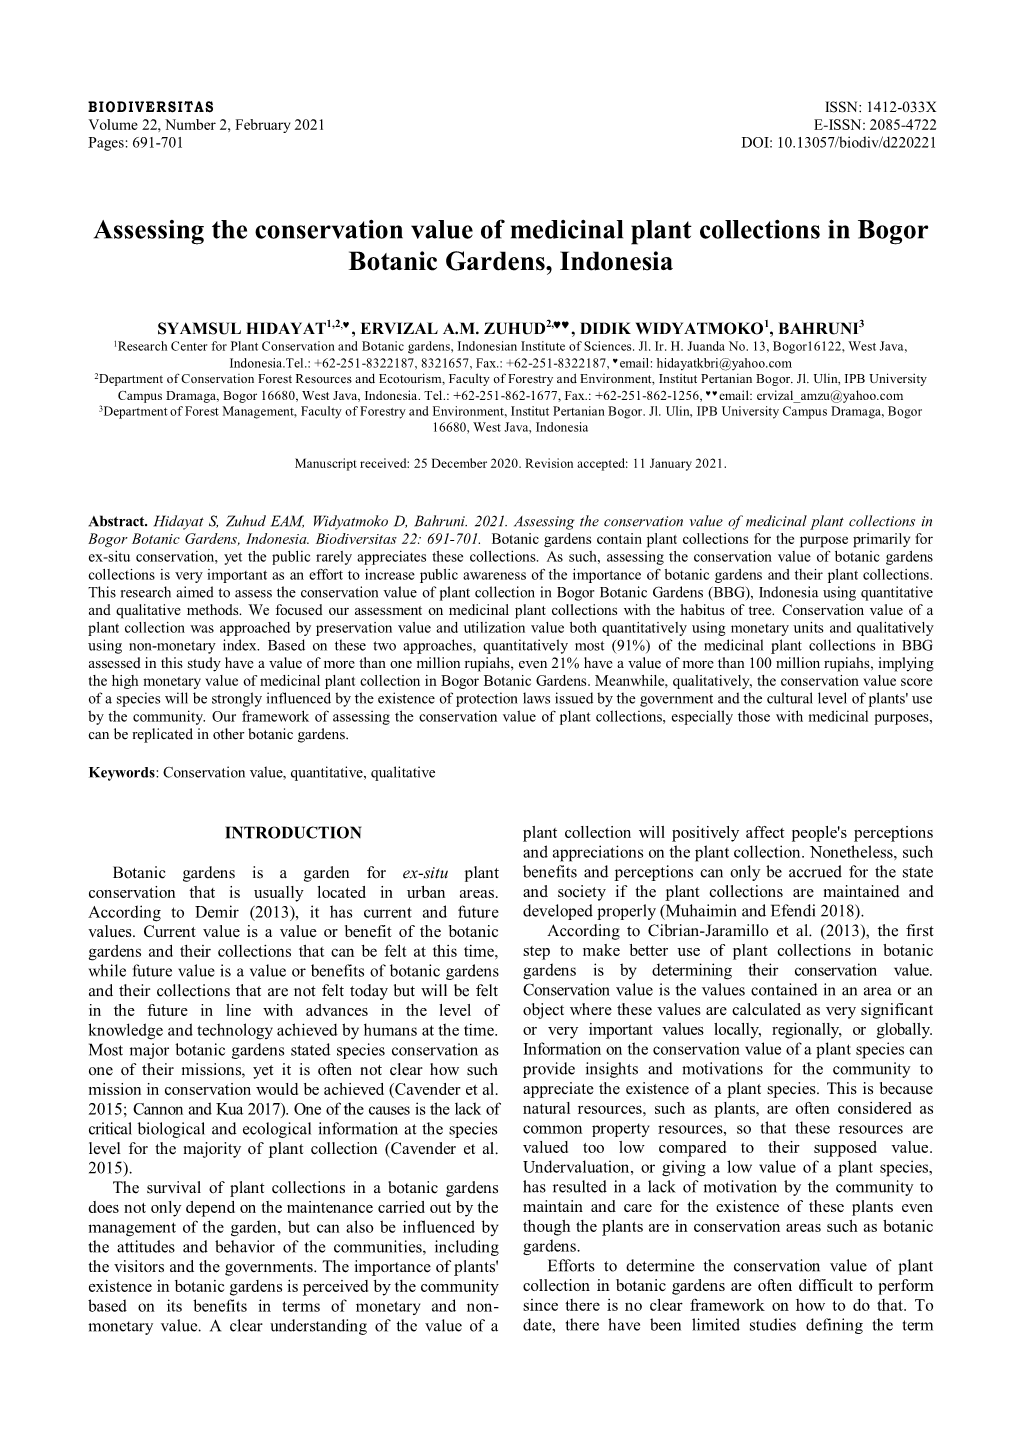 Assessing the Conservation Value of Medicinal Plant Collections in Bogor Botanic Gardens, Indonesia